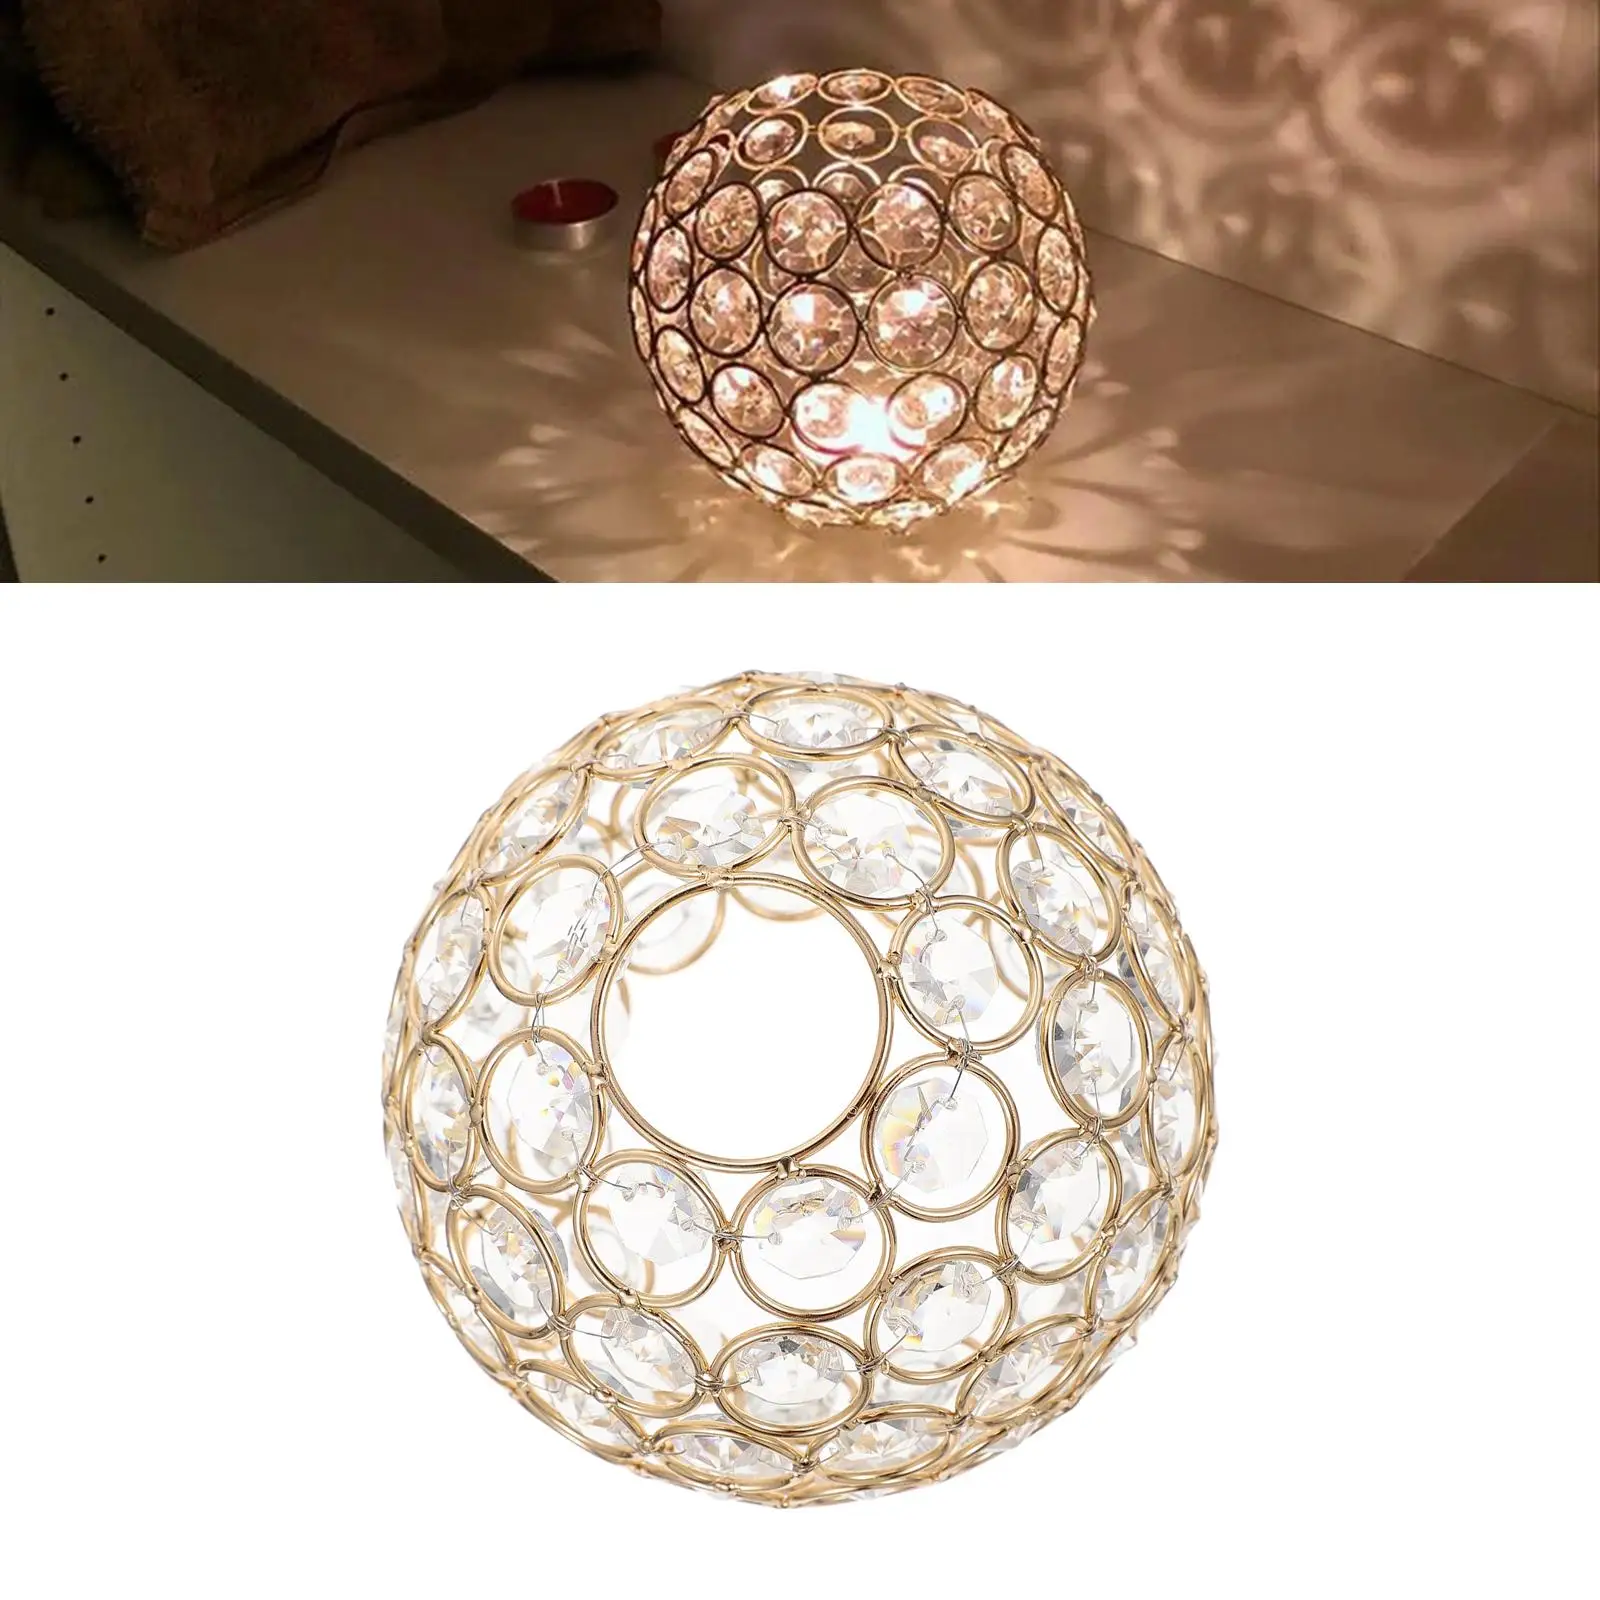 Ceiling Light Shade Replacement Cover Chandelier Crystal Lampshade Only for Antique Lamp Wall Lamp Floor Pendant Light Bathroom